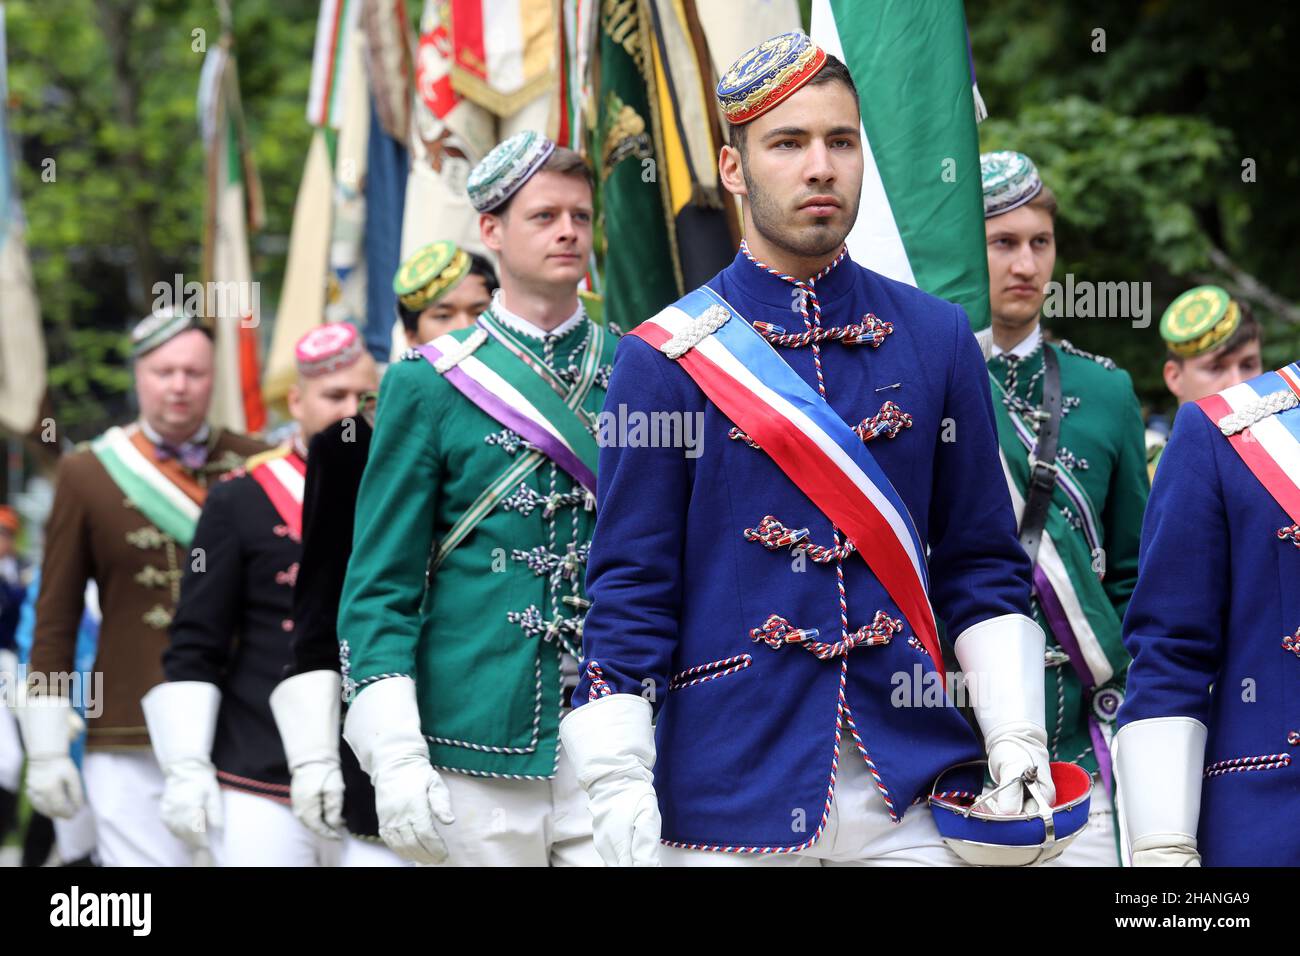 Participants in a Coburg Convent ceremony, parade through the Hofgarten in Coburg today. The 151st Coburg Covent is underway this weekend in Coburg Ge Stock Photo